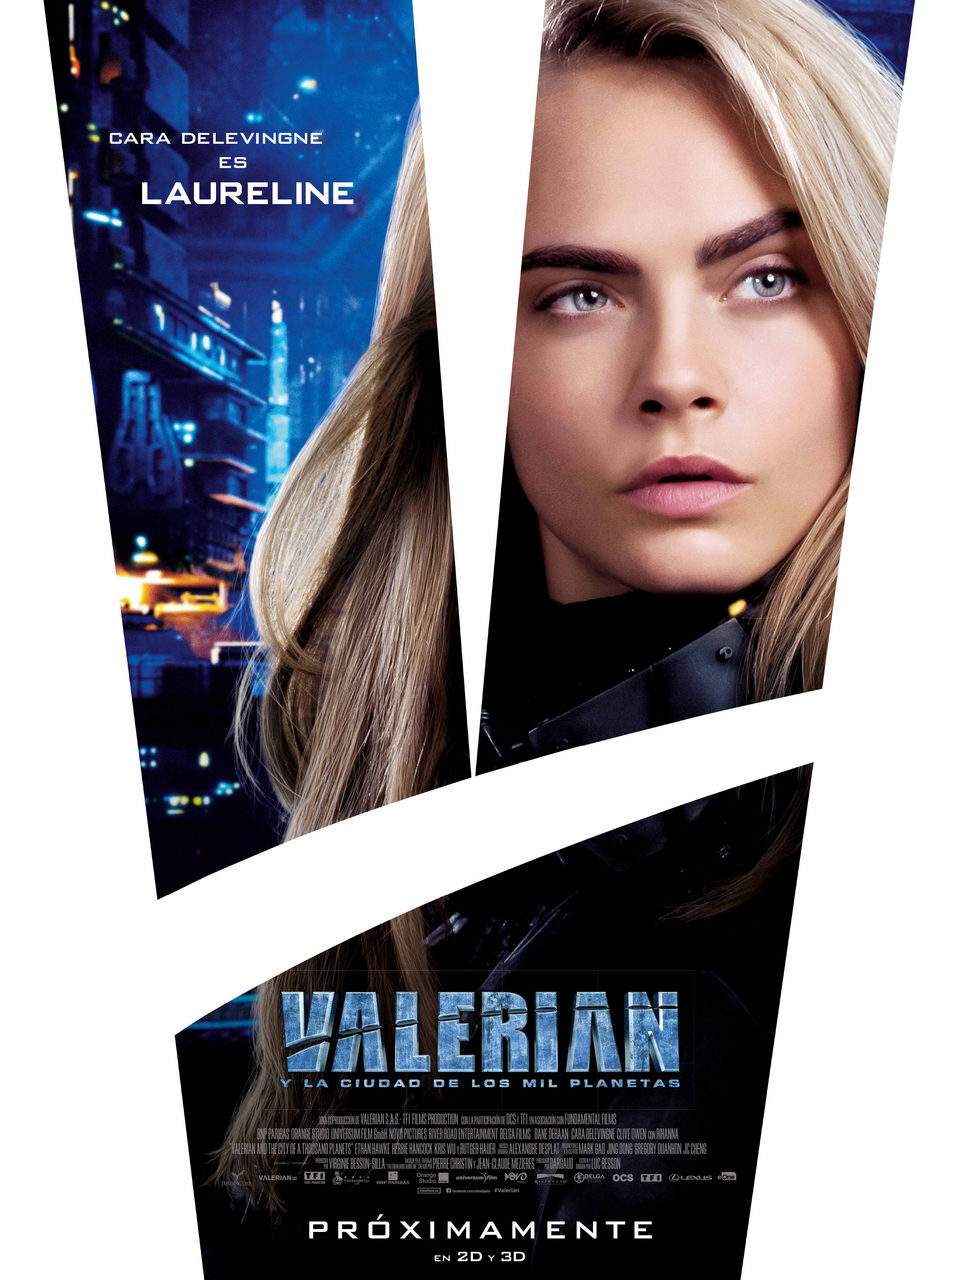 Poster of Valerian and the City of a Thousand Planets - Laureline